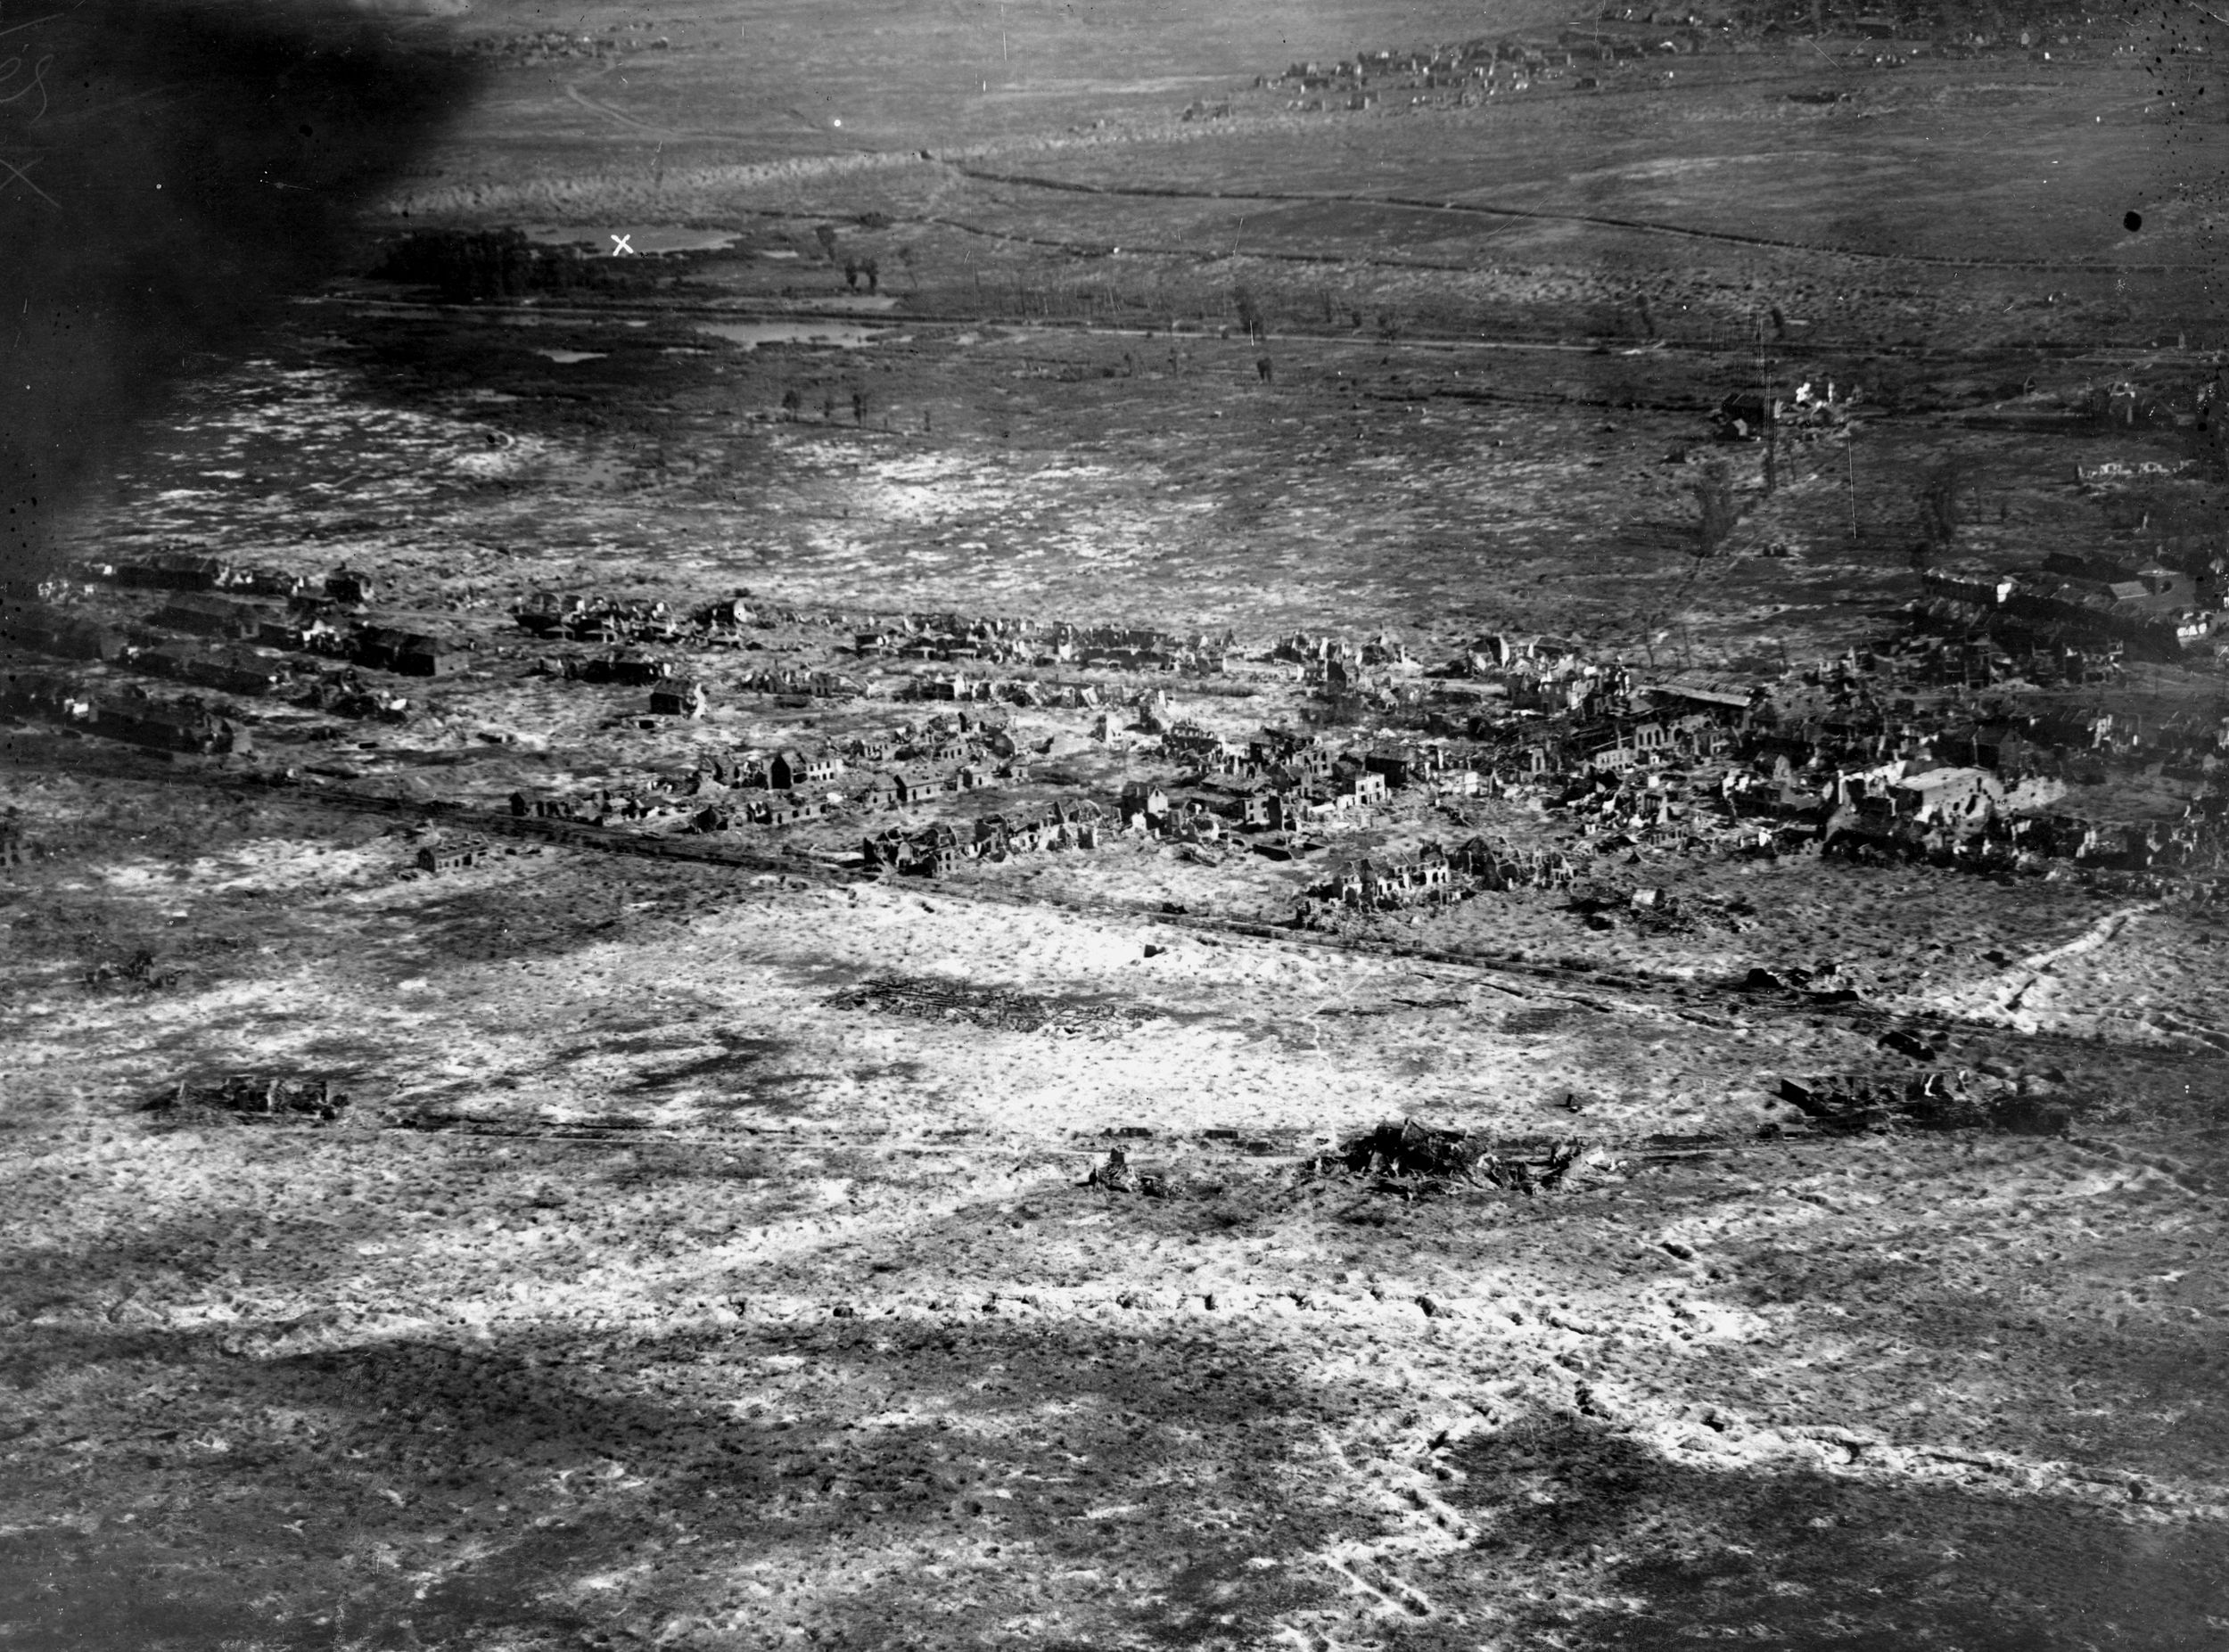 Aerial shot of the denuded Somme battlefield. The ruined wastes exactly match Tolkien’s descriptions of the evil land of Mordor in The Lord of the Rings.